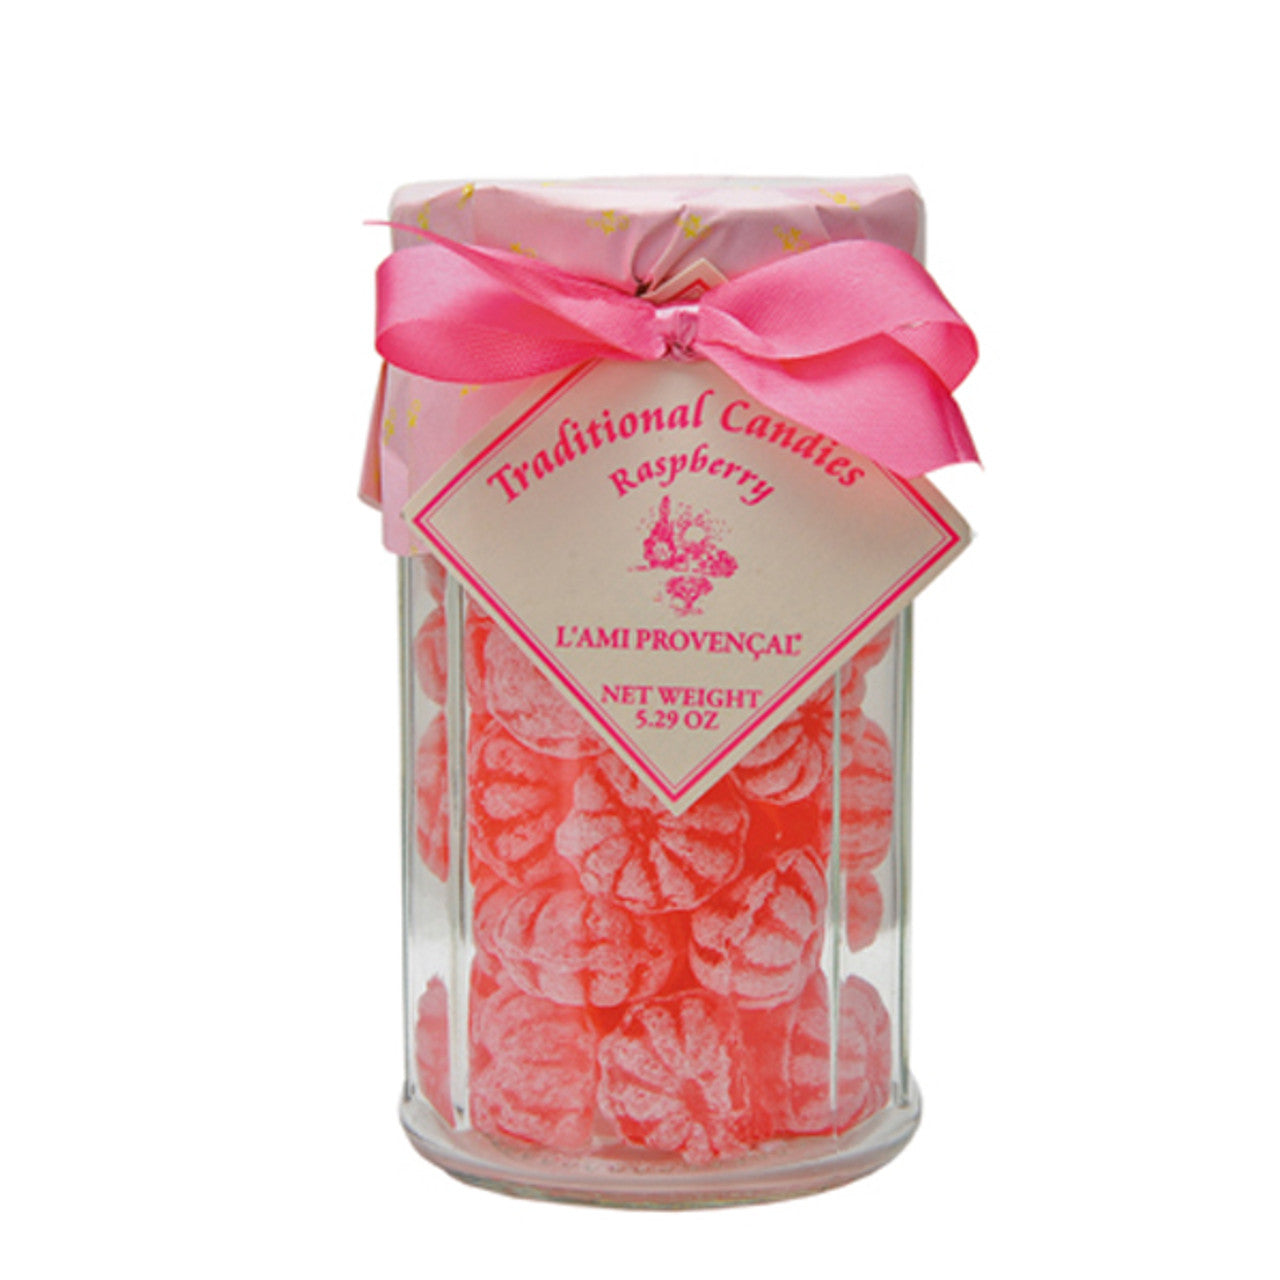 Old Fashioned Raspberry Candies "L'Ami Provencal"